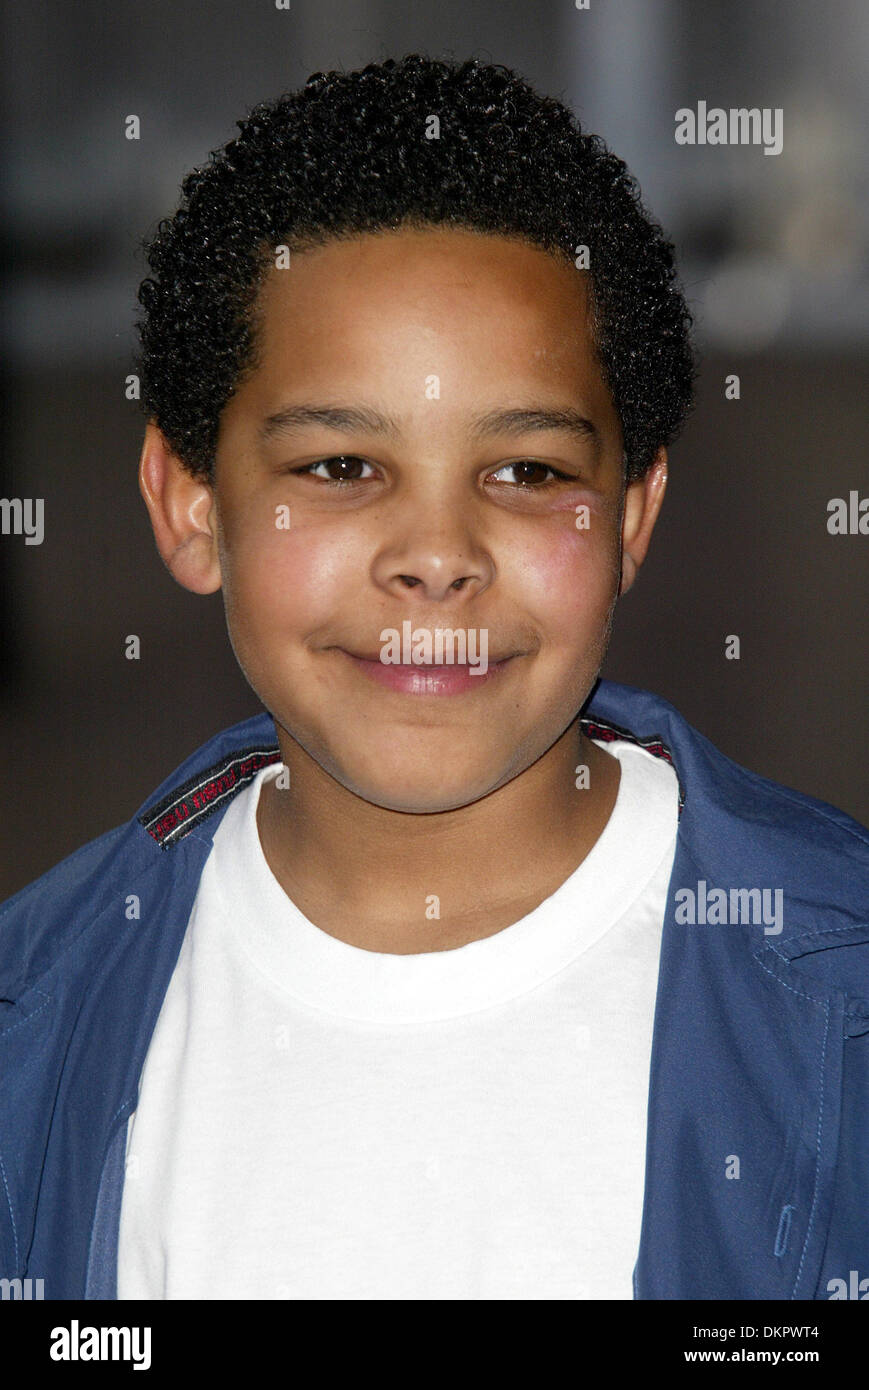 OMERO MUMBA.ACTOR & BROTHER OF SAMANTHA.ONDON, ENGL.THE ODEON, LEICESTER SQUARE, L.26/06/2002.DI2886. Stock Photo